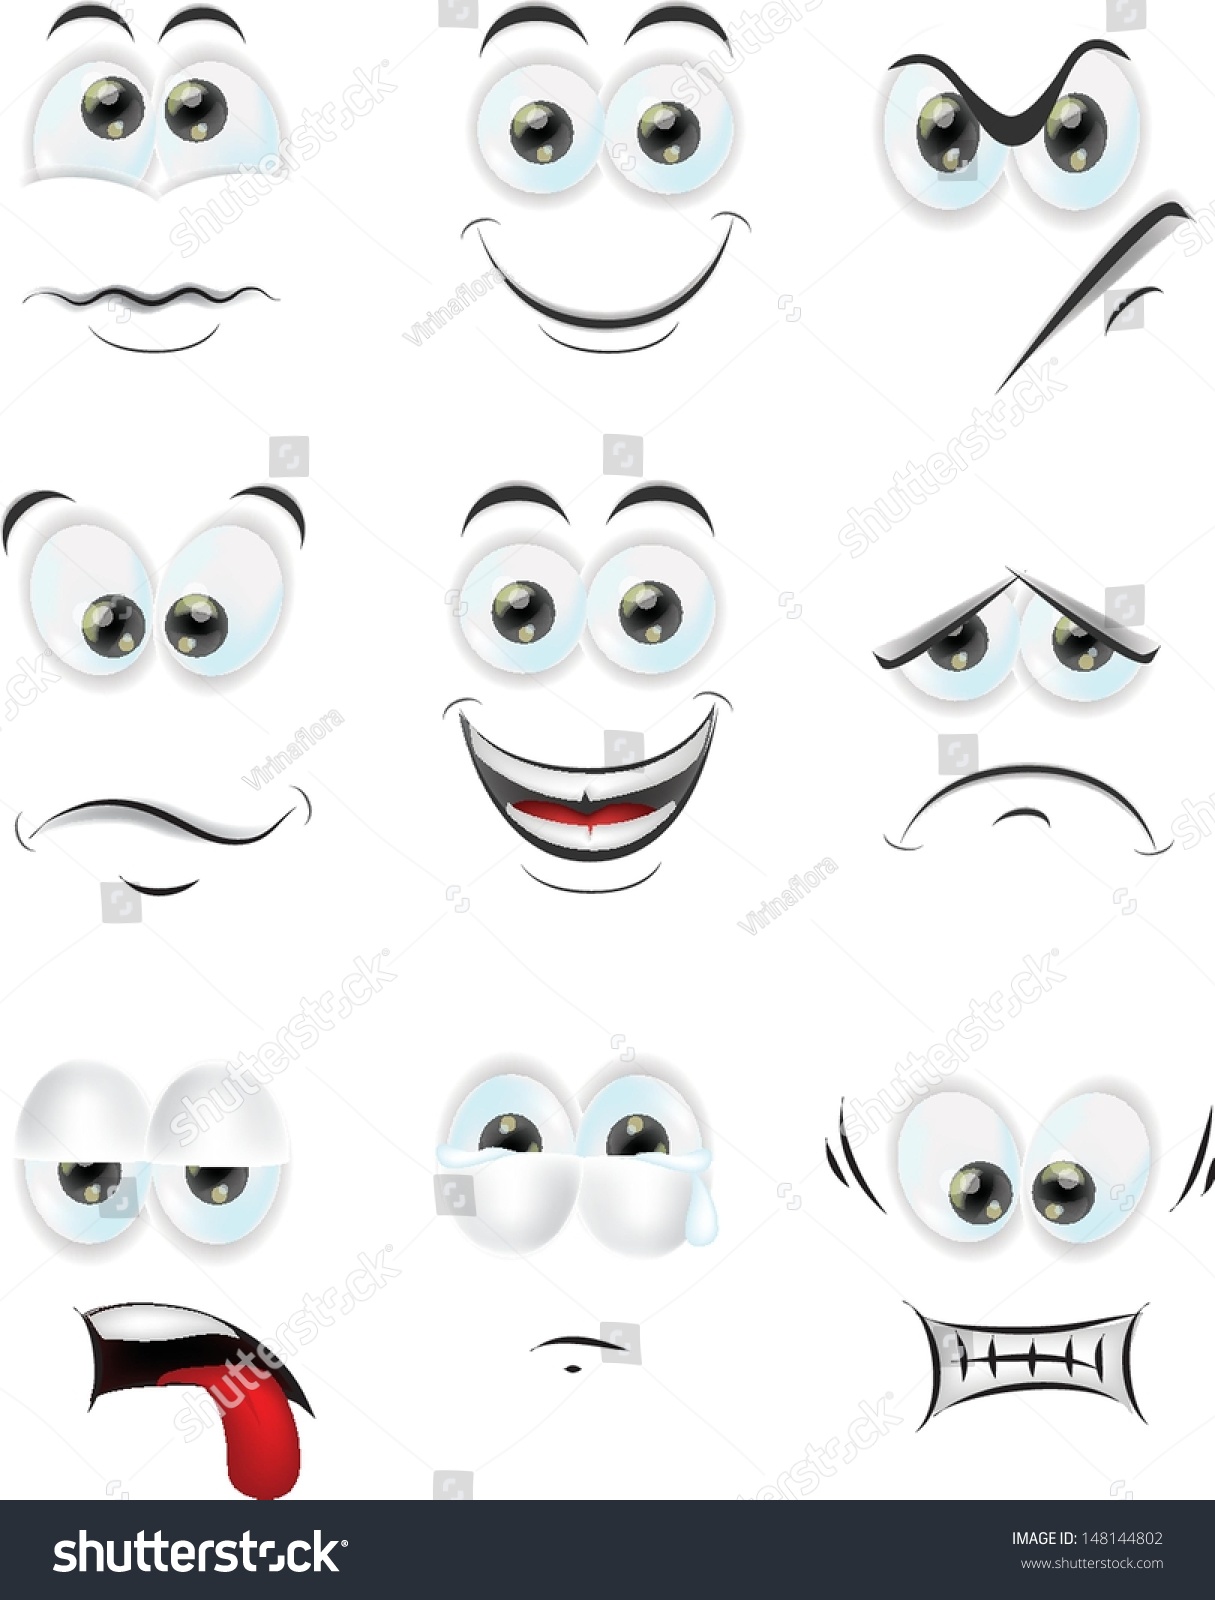 Cartoon Faces With Emotions Stock Vector Illustration 148144802 ...